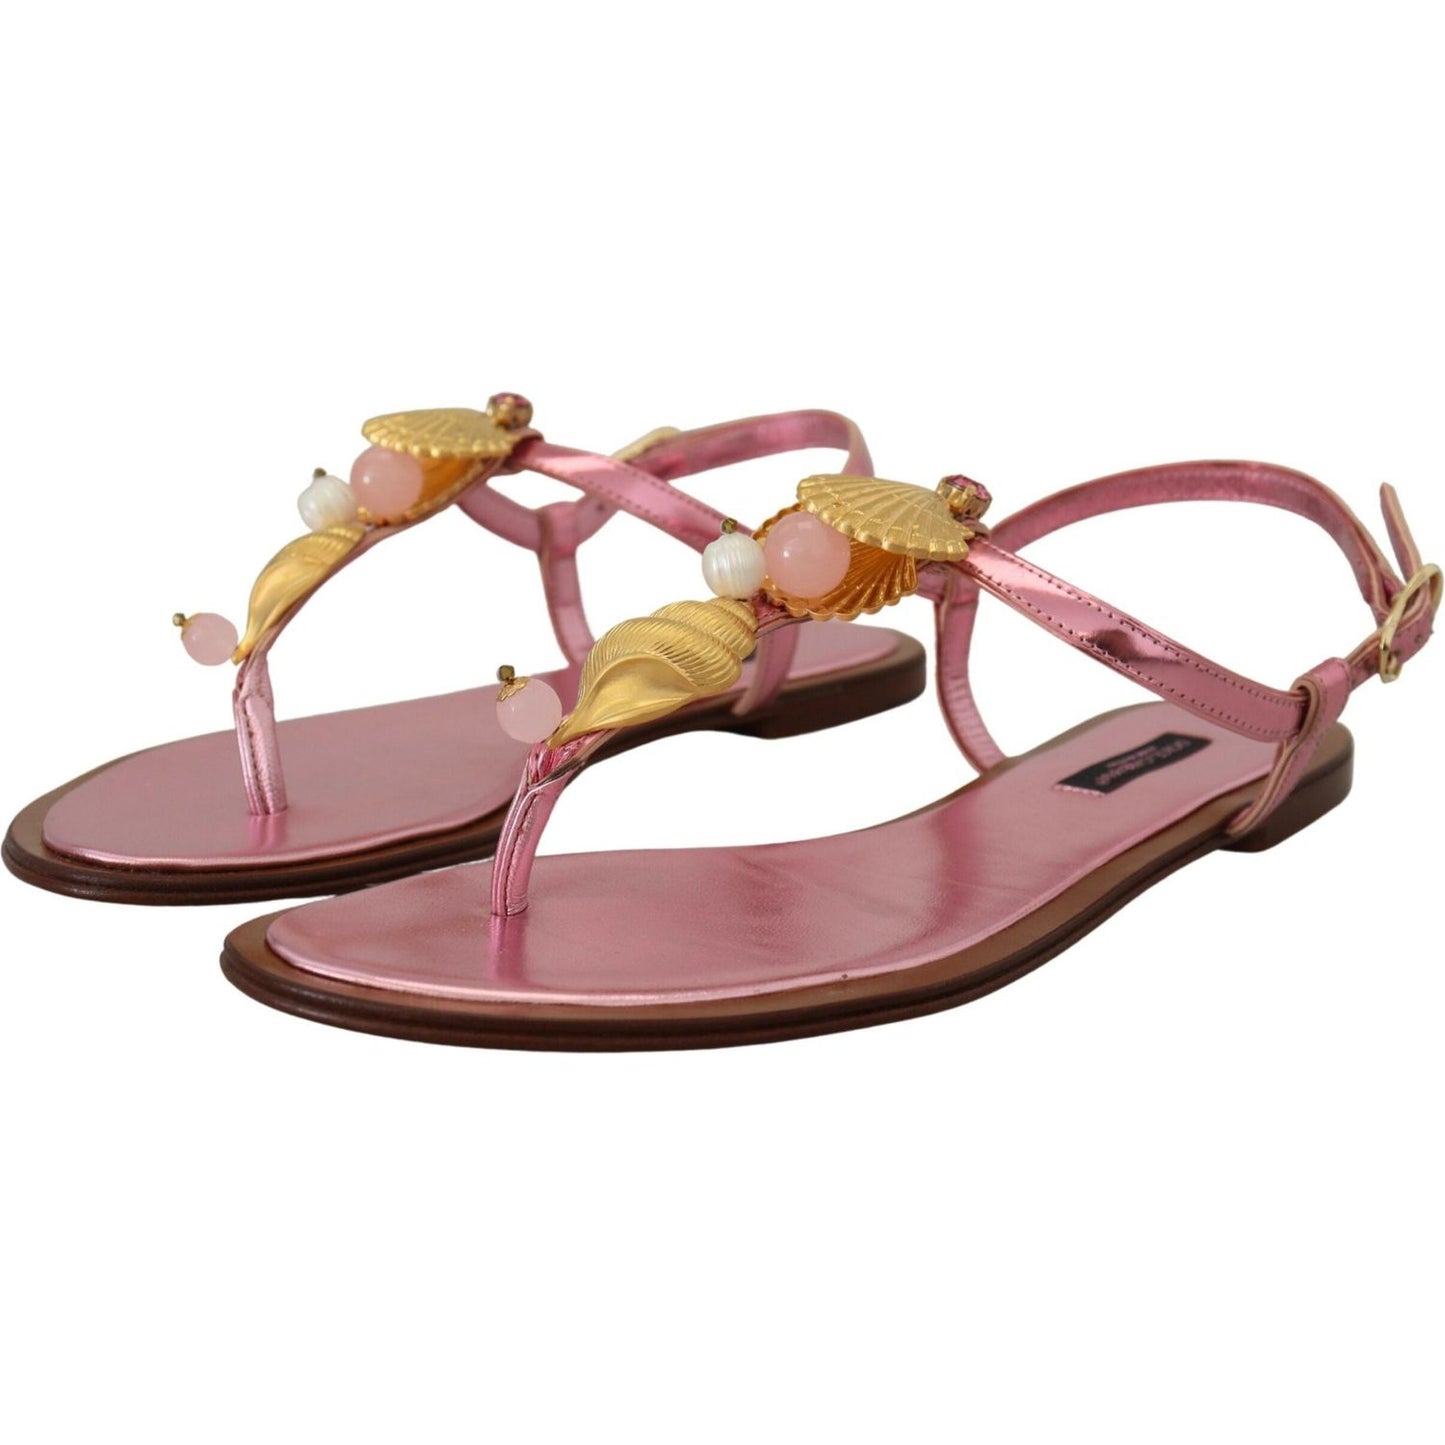 Dolce & Gabbana Chic Pink Leather Sandals with Exquisite Embellishment pink-embellished-slides-flats-sandals-shoes